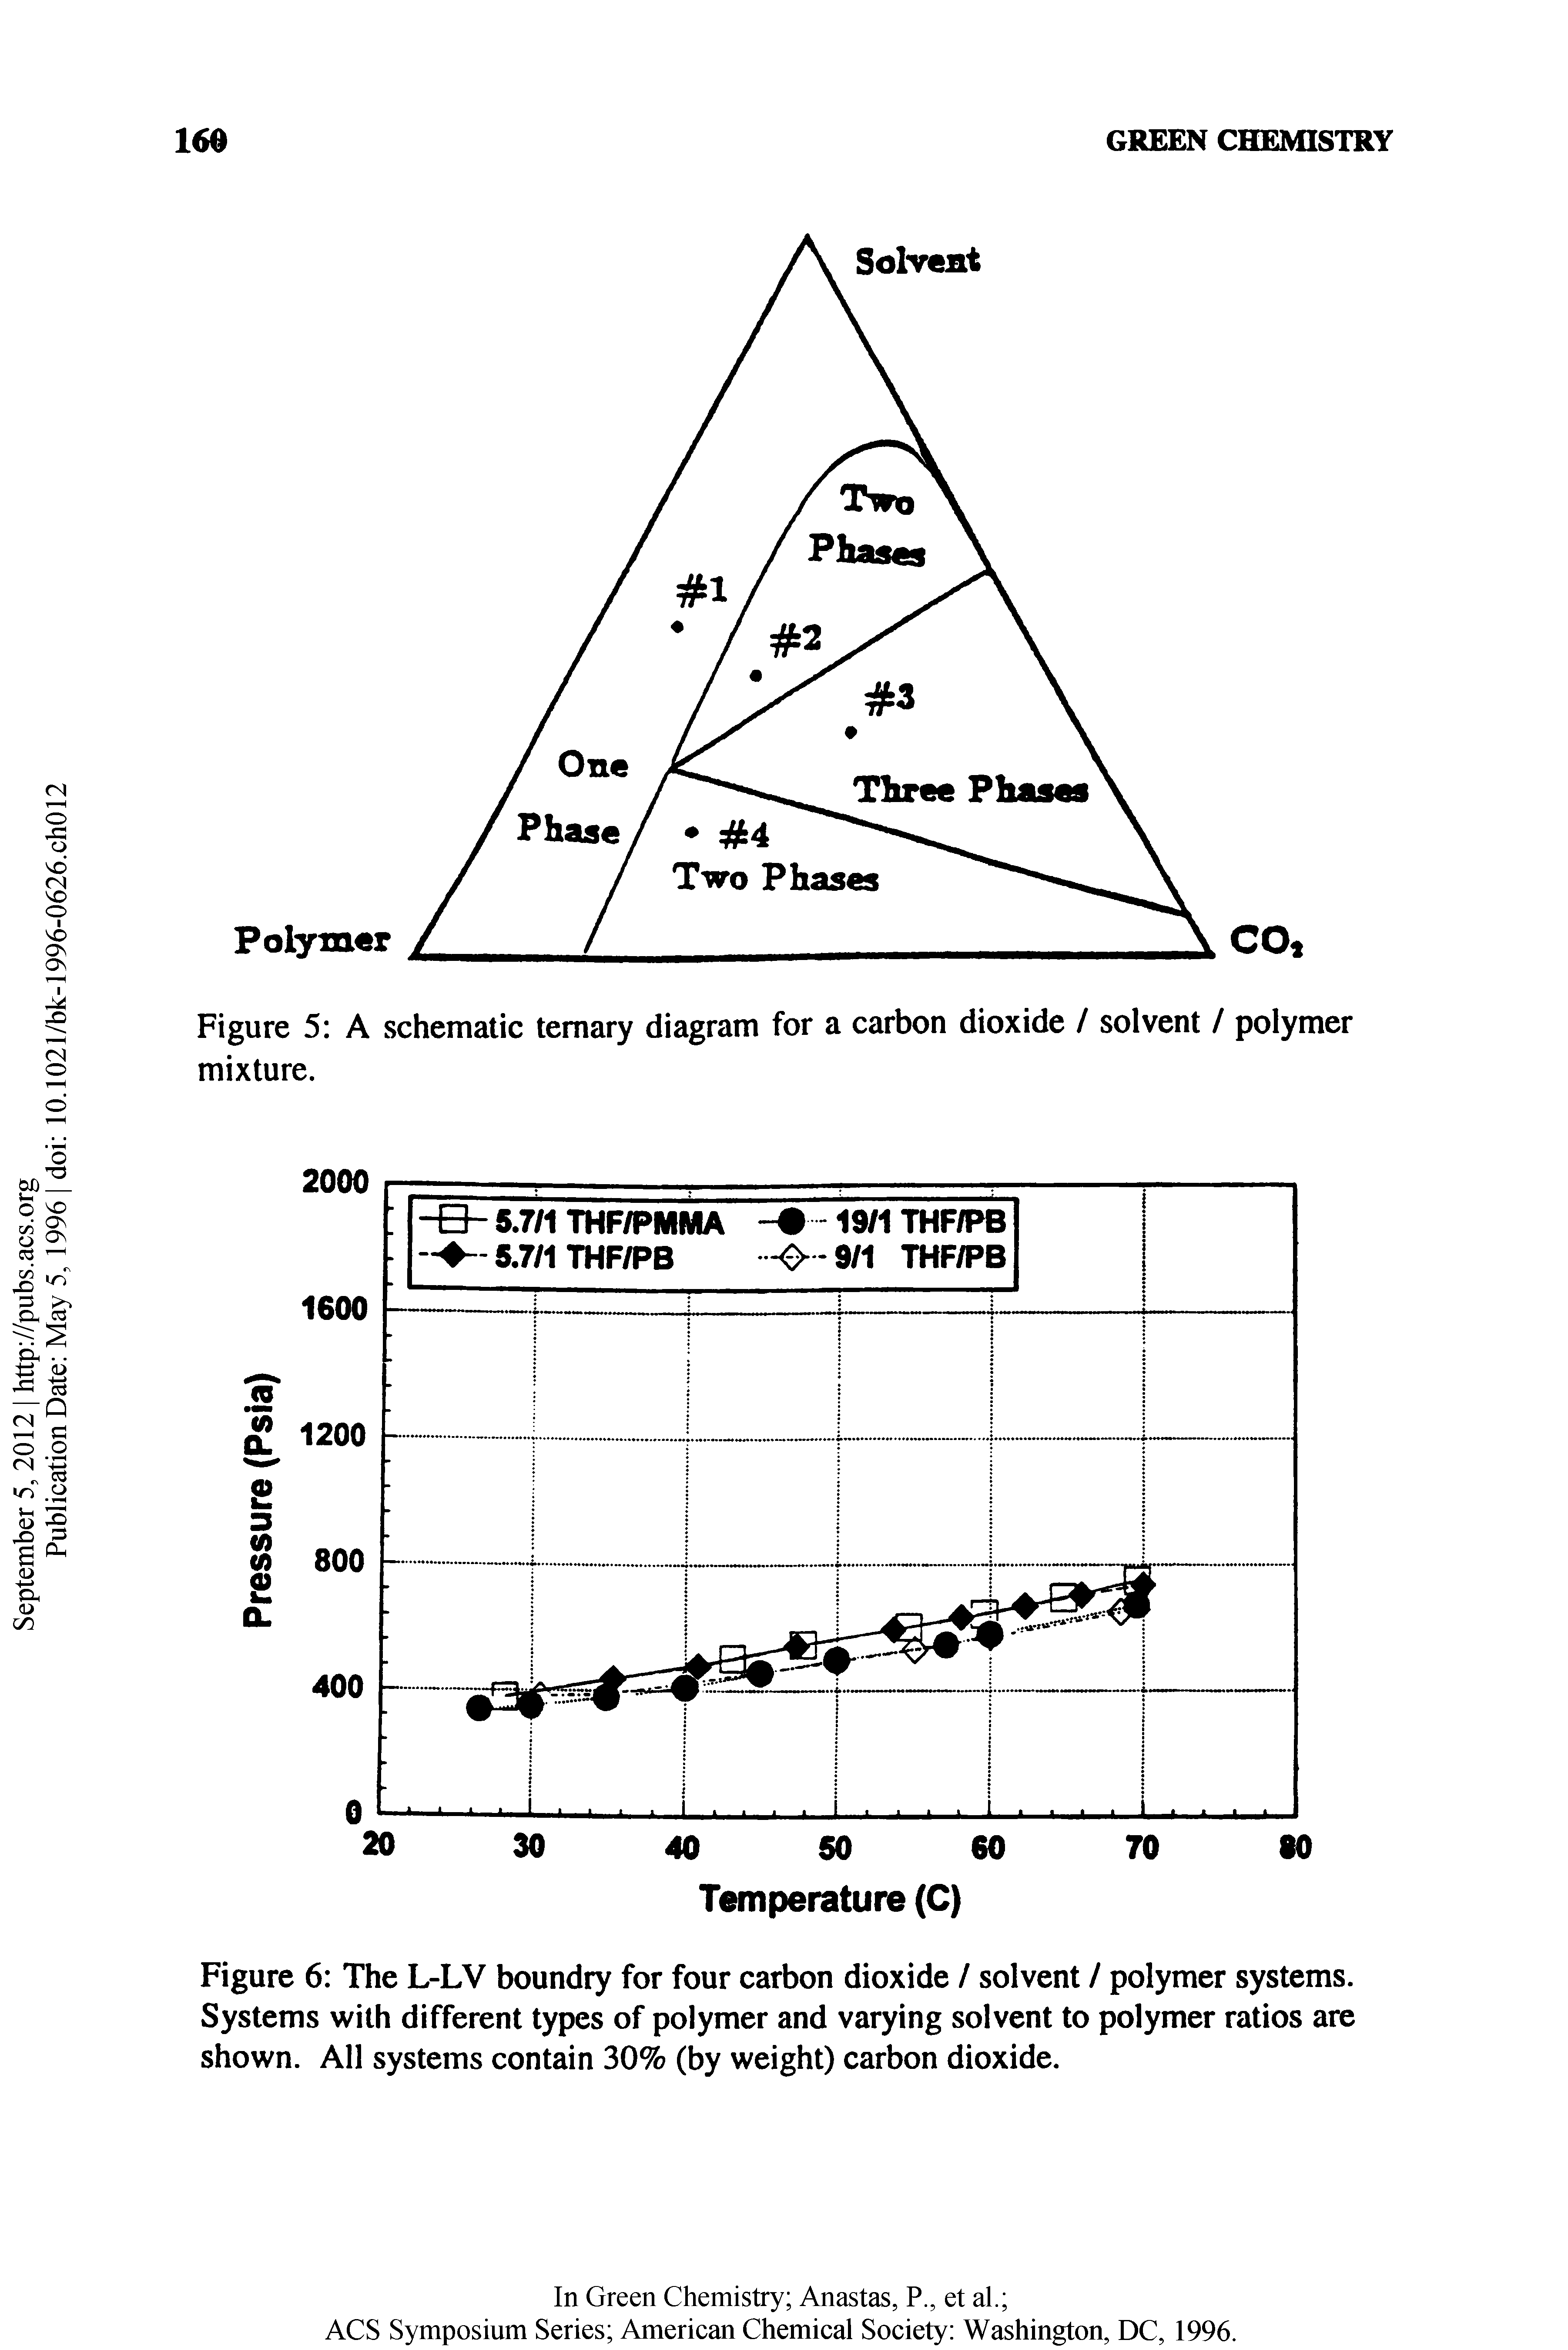 Figure 6 The L-LV boundry for four carbon dioxide / solvent / polymer systems. Systems with different types of polymer and varying solvent to polymer ratios are shown. All systems contain 30% (by weight) carbon dioxide.